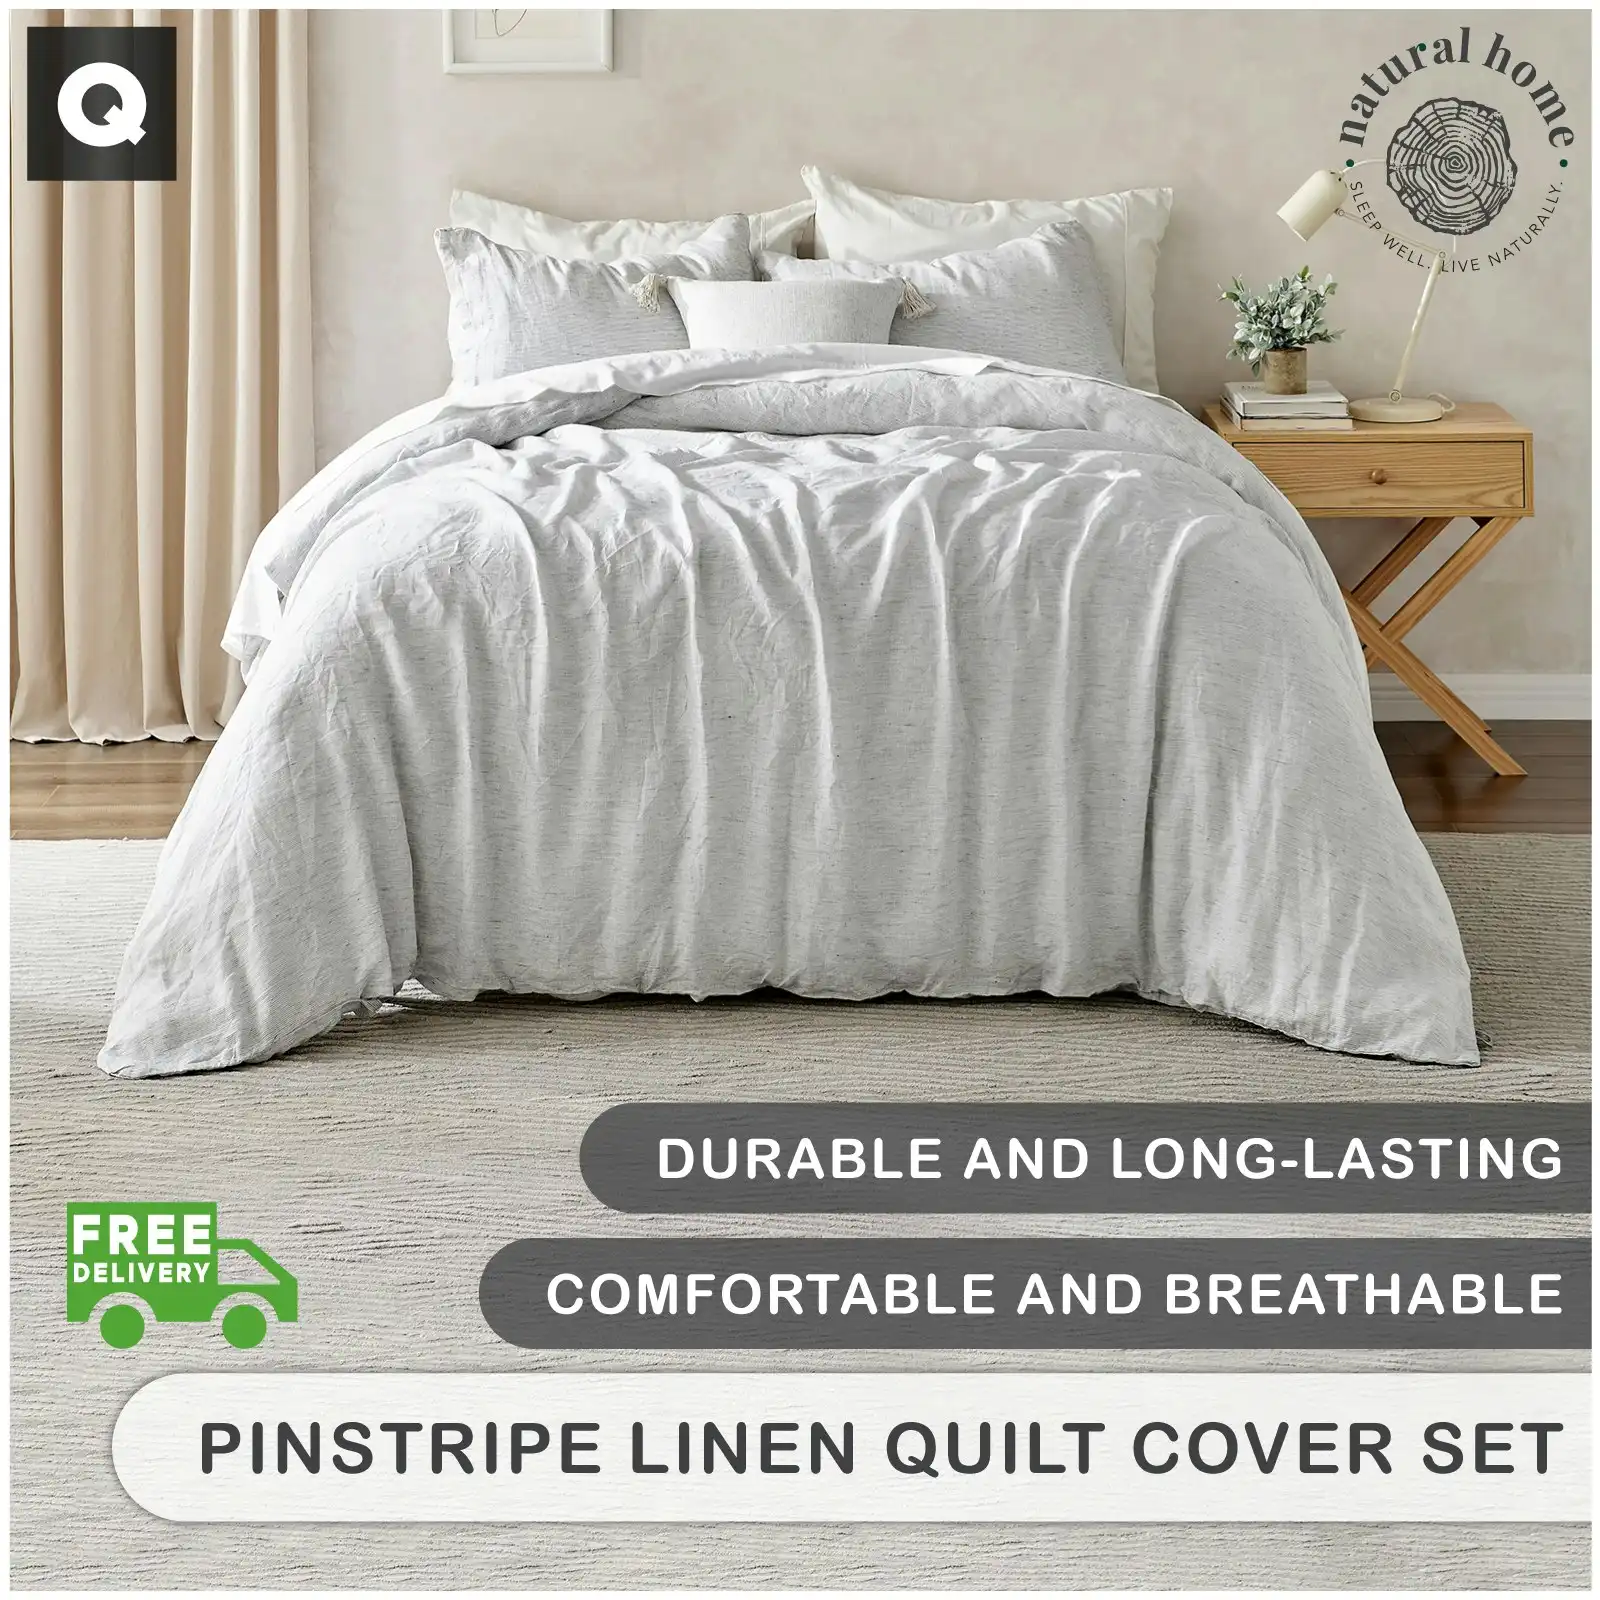 Natural Home Classic Pinstripe Linen Quilt Cover Set Dark with White Pinstripe Queen Bed